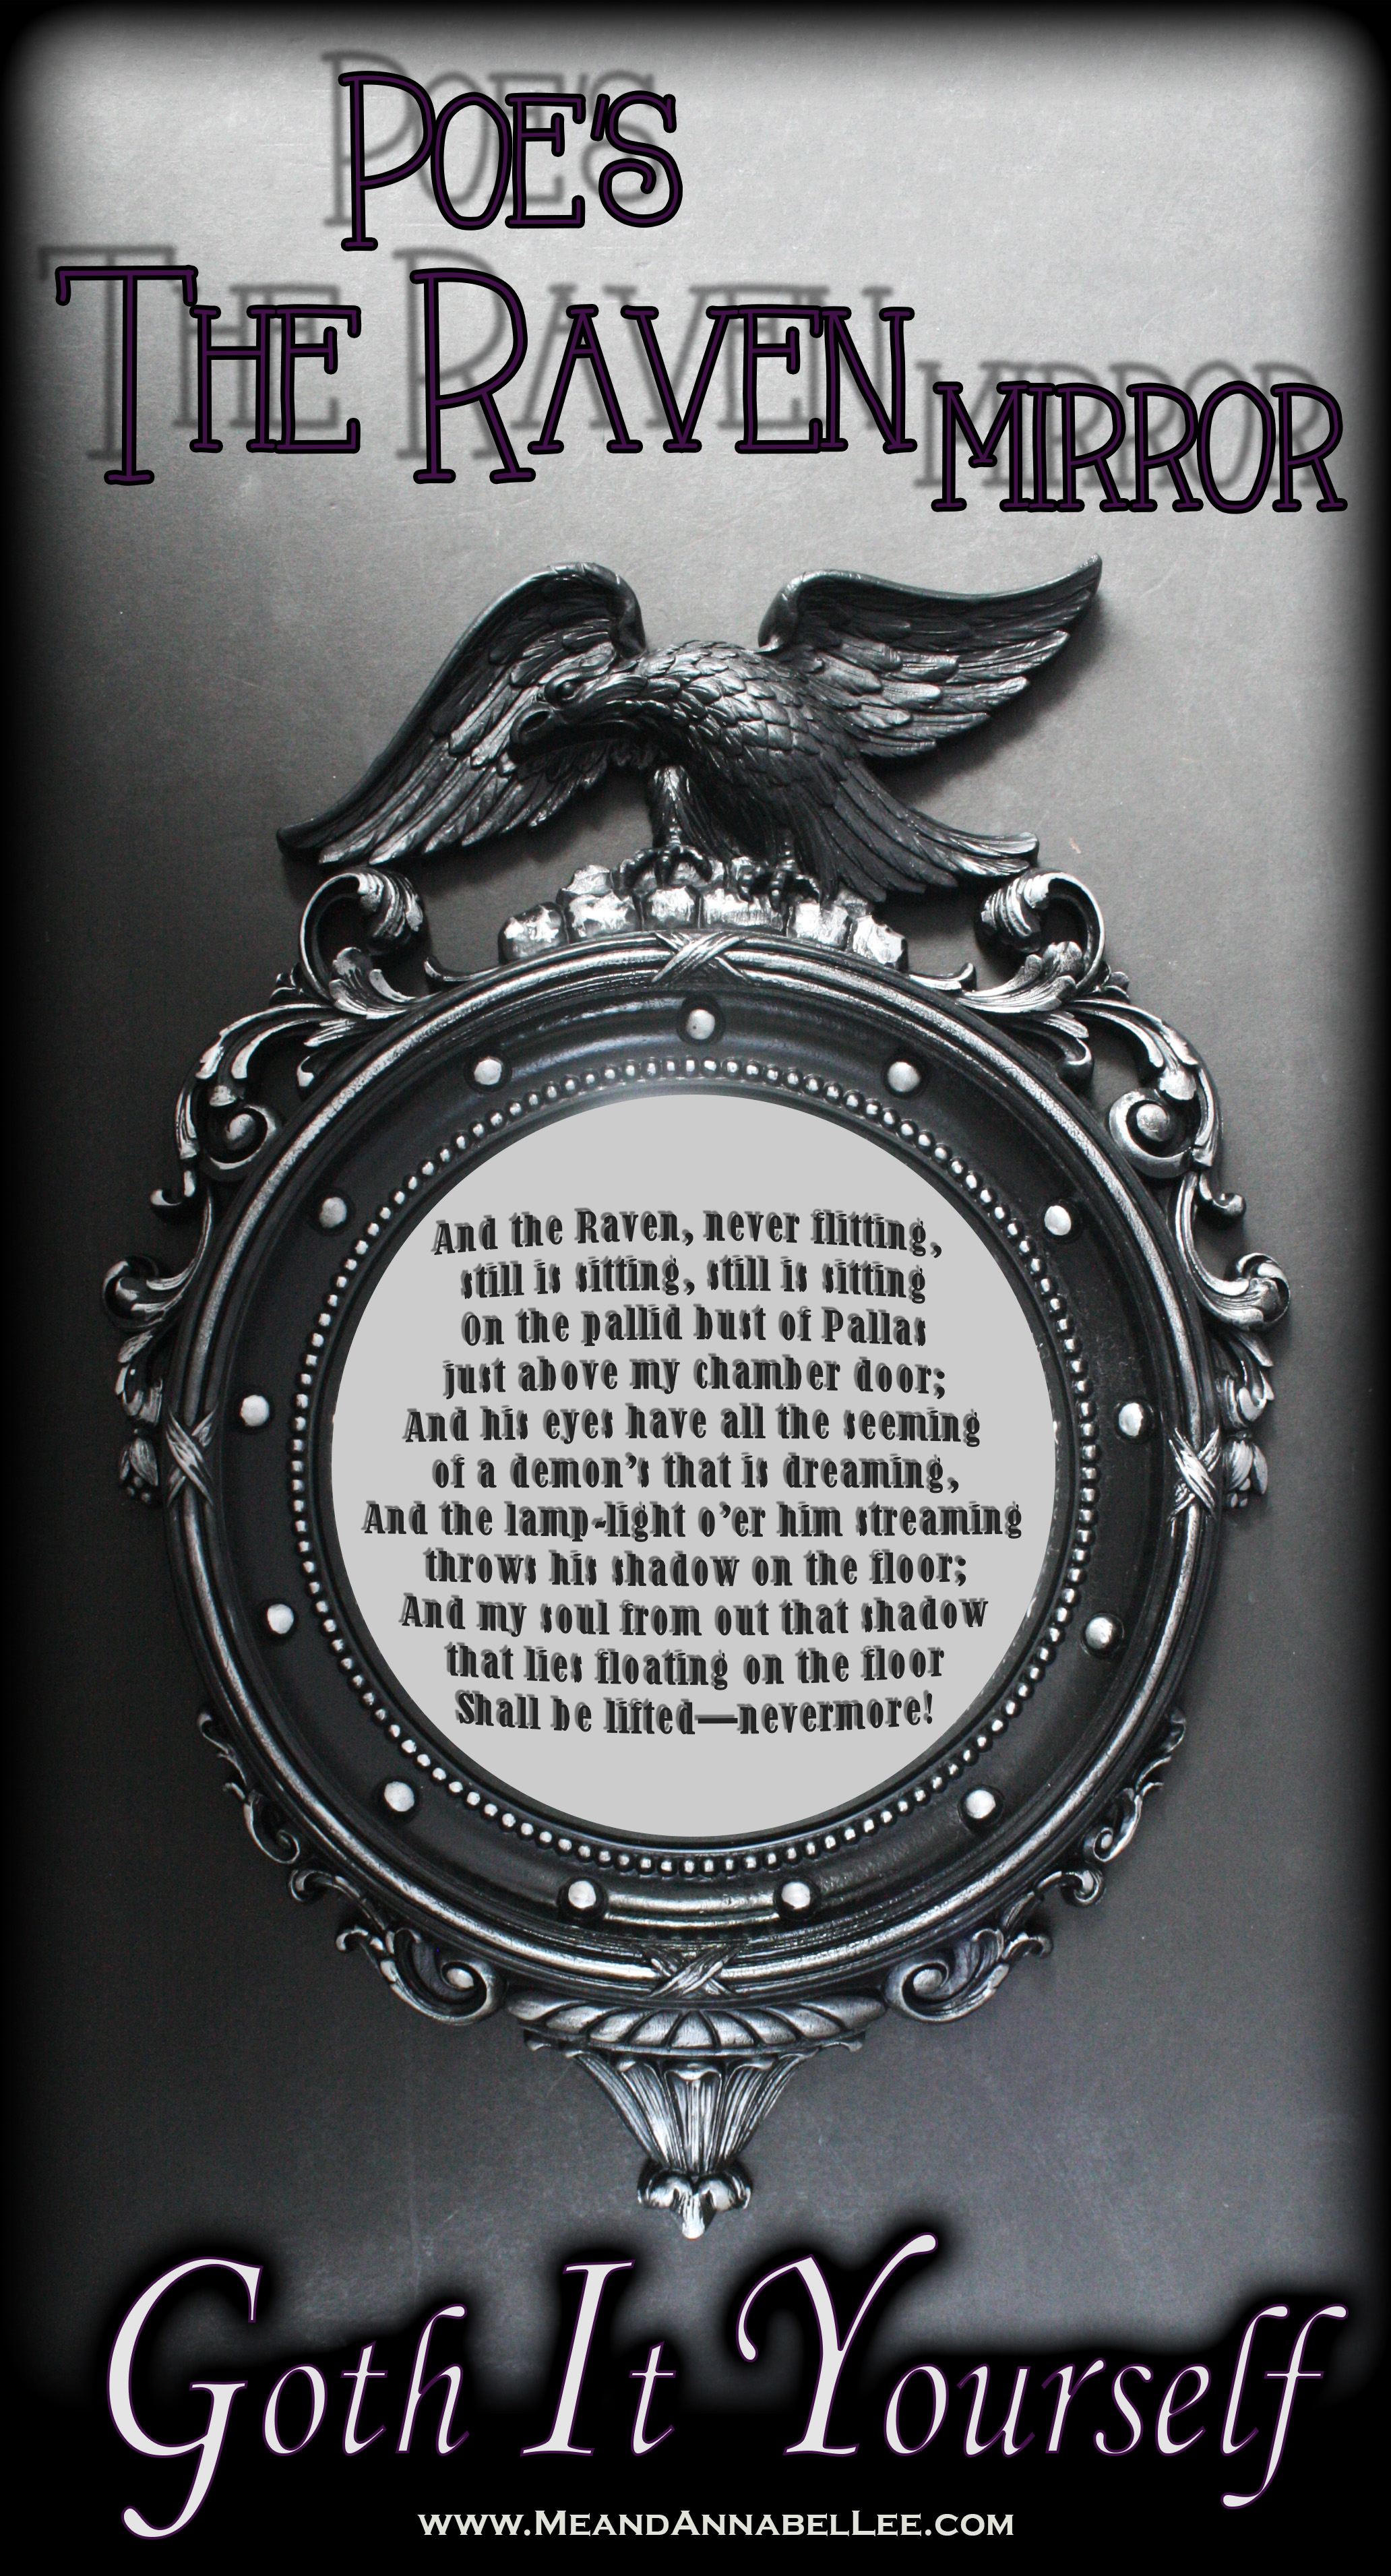 Federal Mirror Makeover | Edgar Allan Poe Wall Art | The Raven Quote | How to apply vinyl to a curved surface | Cricut Tutorial | Nevermore | Goth Home Decor | www.MeandAnnabelLee.com